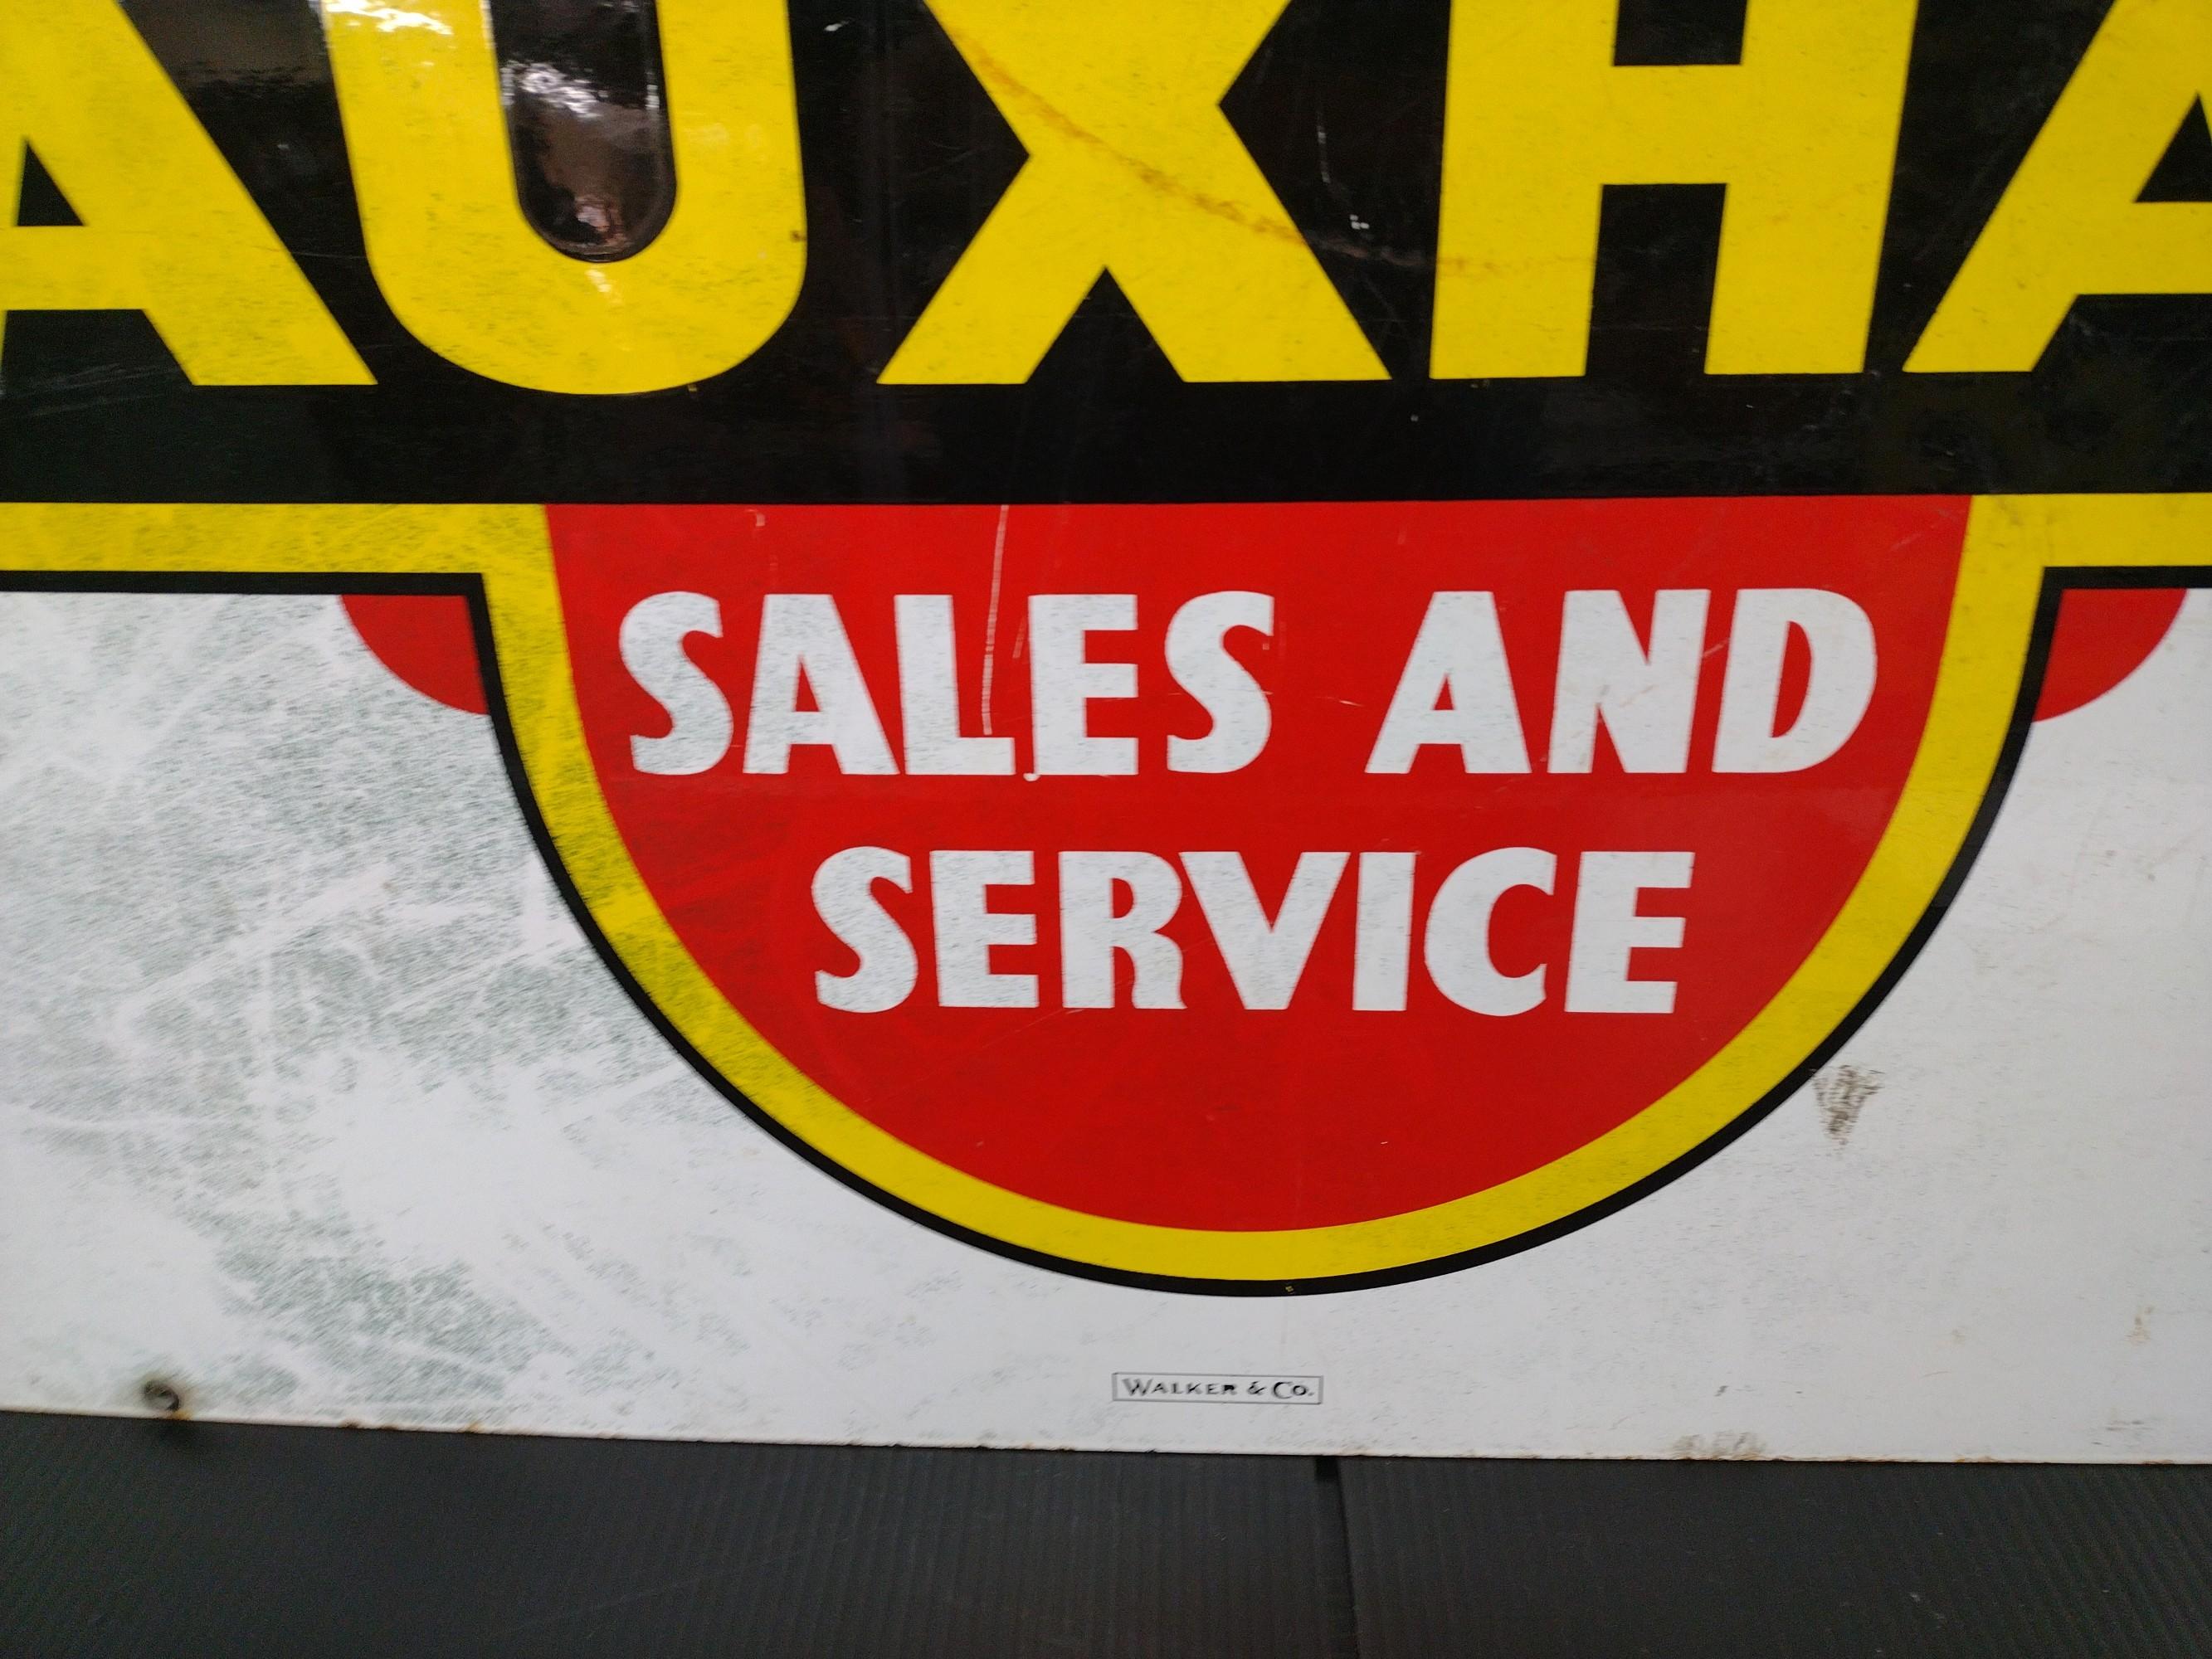 Original DSP Vauxhall Sales and Service Sign.